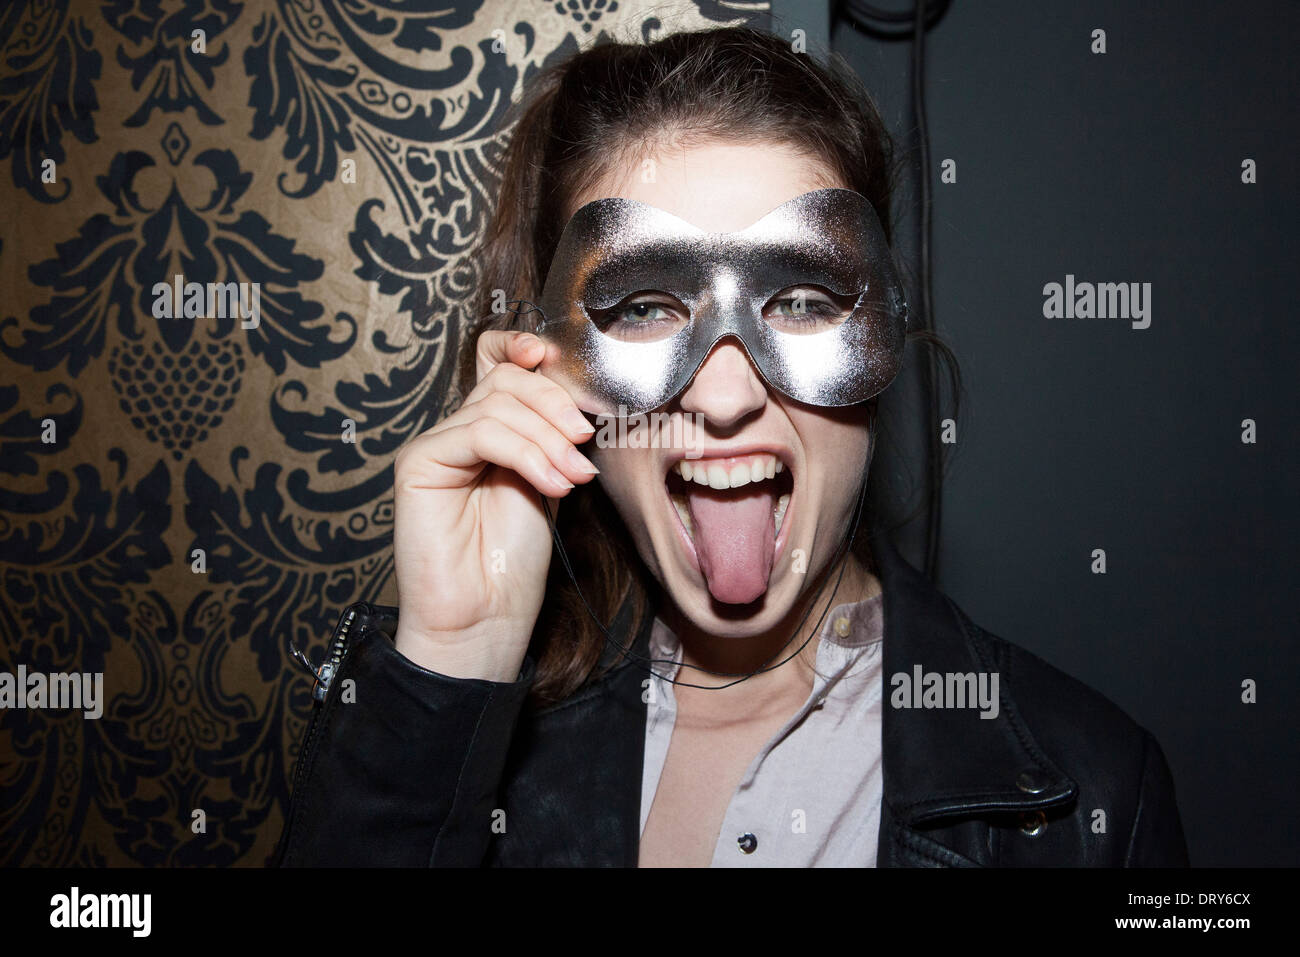 Woman wearing party mask, sticking out tongue, portrait Stock Photo